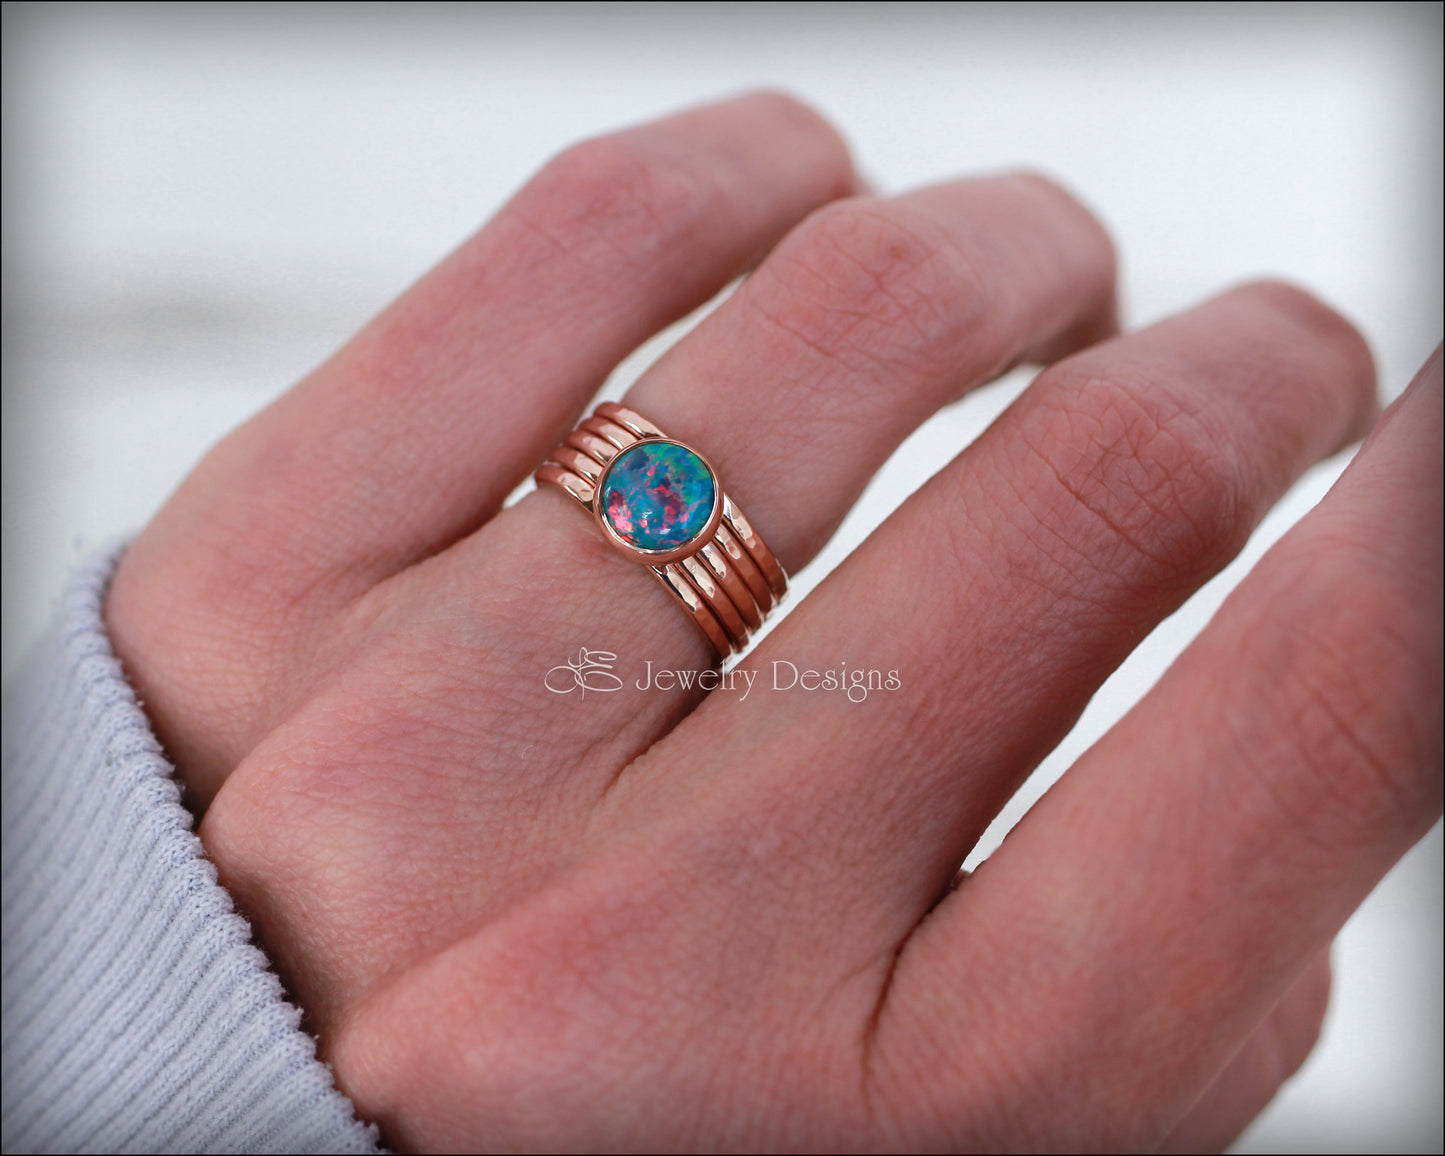 Load image into Gallery viewer, Opal Stacking Ring Set - (sterling, 14k gold-filled) - LE Jewelry Designs
